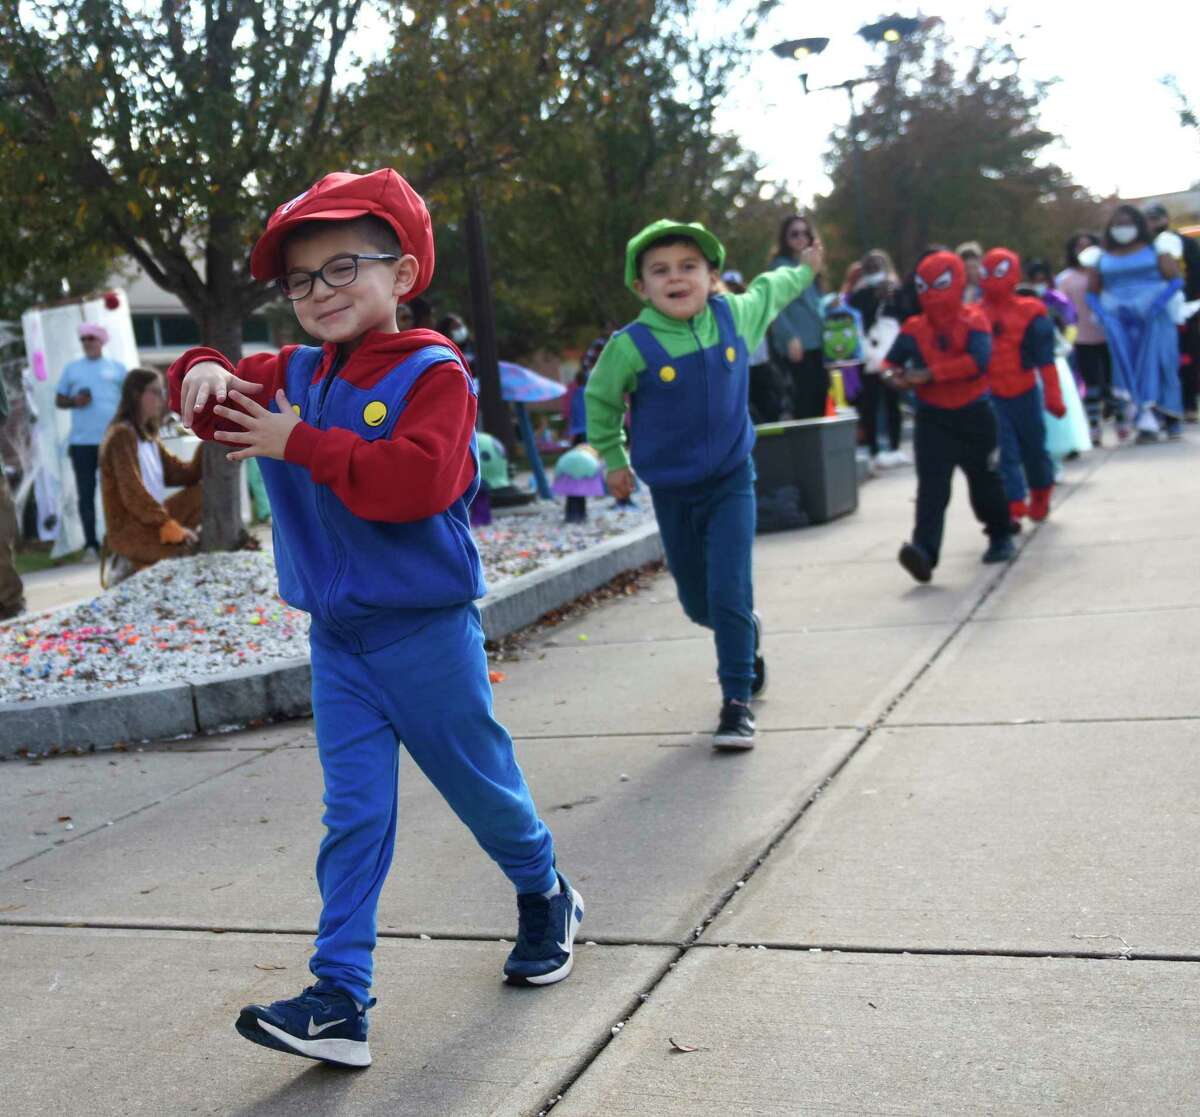 Stamford's Marco Fusaro, and his brother, Matteo Fusaro, both 6, are dressed as Mario and Luigi in the costume contest at the Tech or Treat Halloween event at J.M. Wright Technical High School in Stamford, Conn. Sunday, Oct. 31, 2021. The spooky event featured a kids costume contest, pumpkin painting, game stations, spooky vignettes made by students, a DJ, and 'Bone' Appétit cafe.